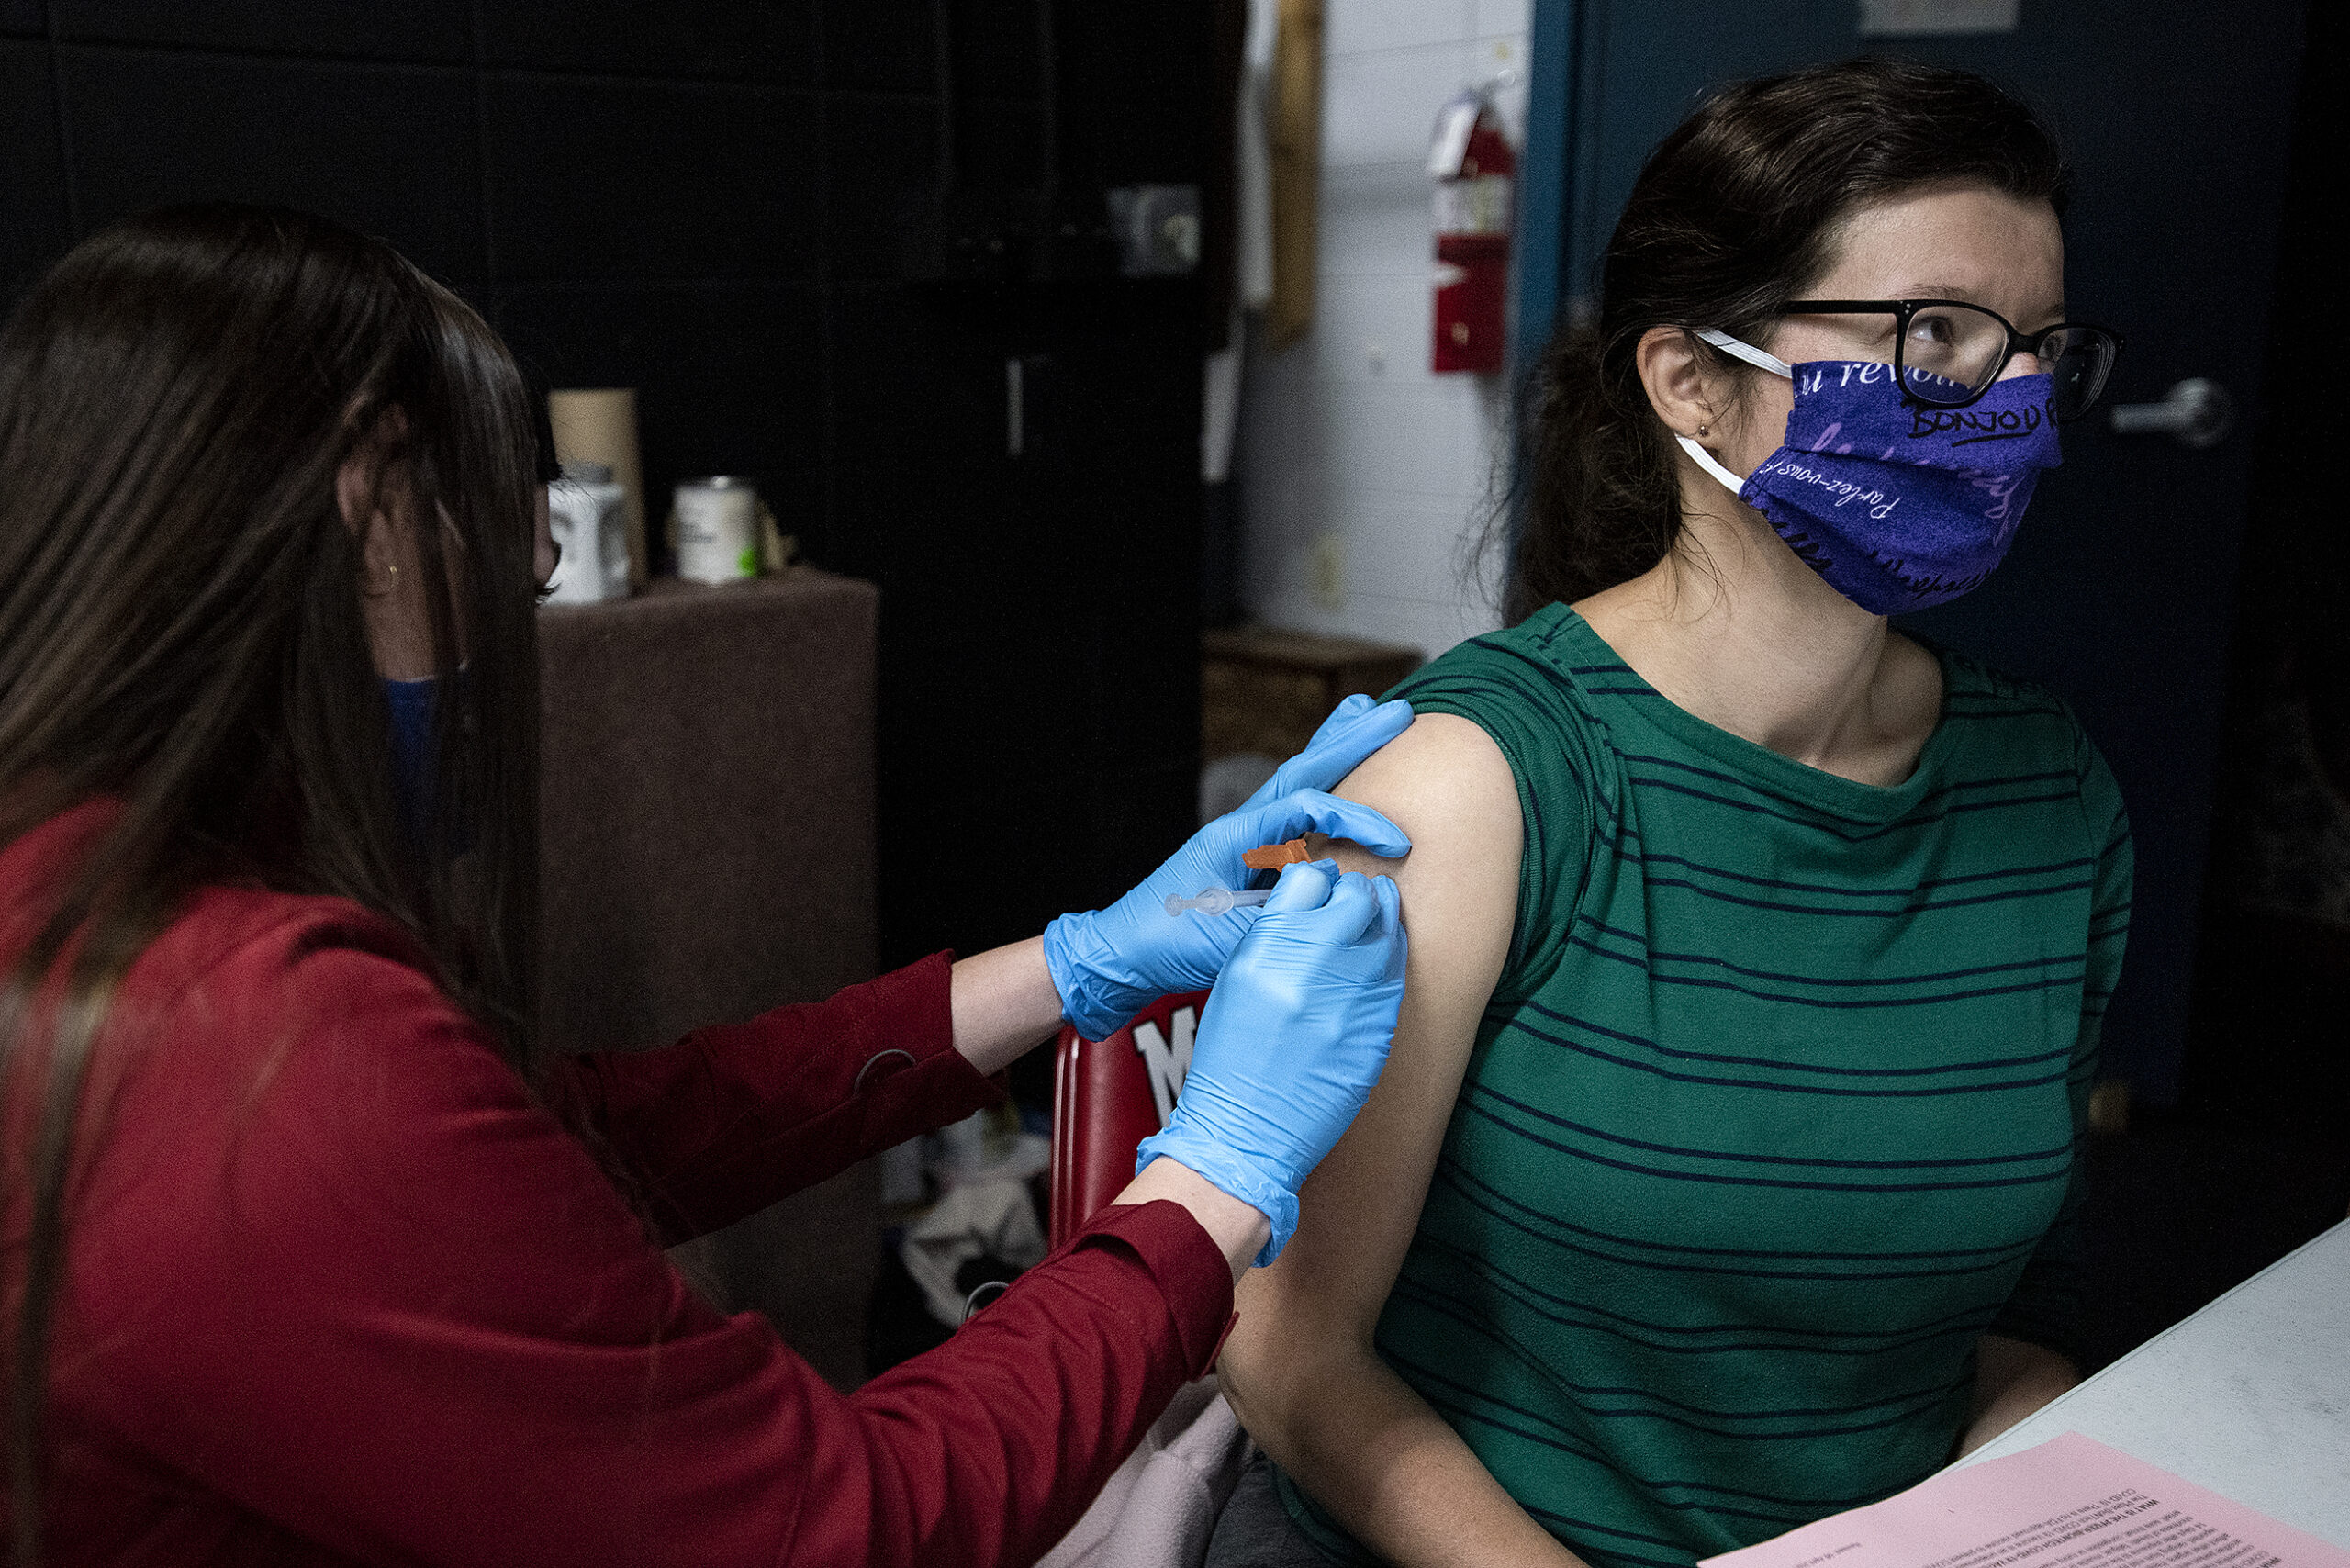 A woman with a rolled up sleeve receives a vaccine from a woman wearing blue gloves.